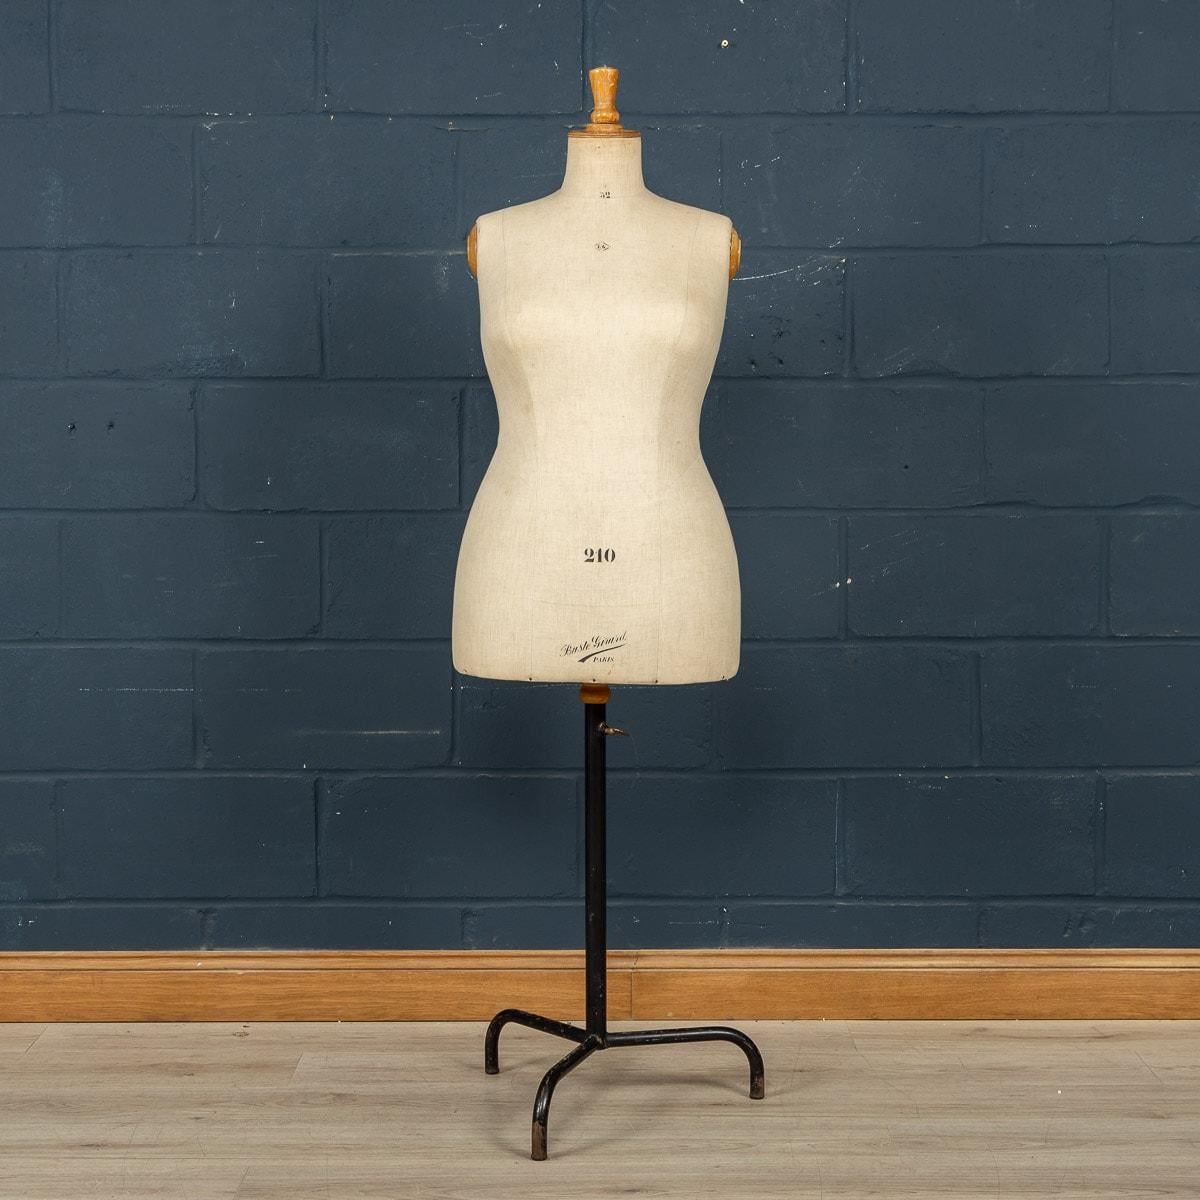 Steel 20th Century French Shop Mannequin By Buste Girard, c.1920 For Sale